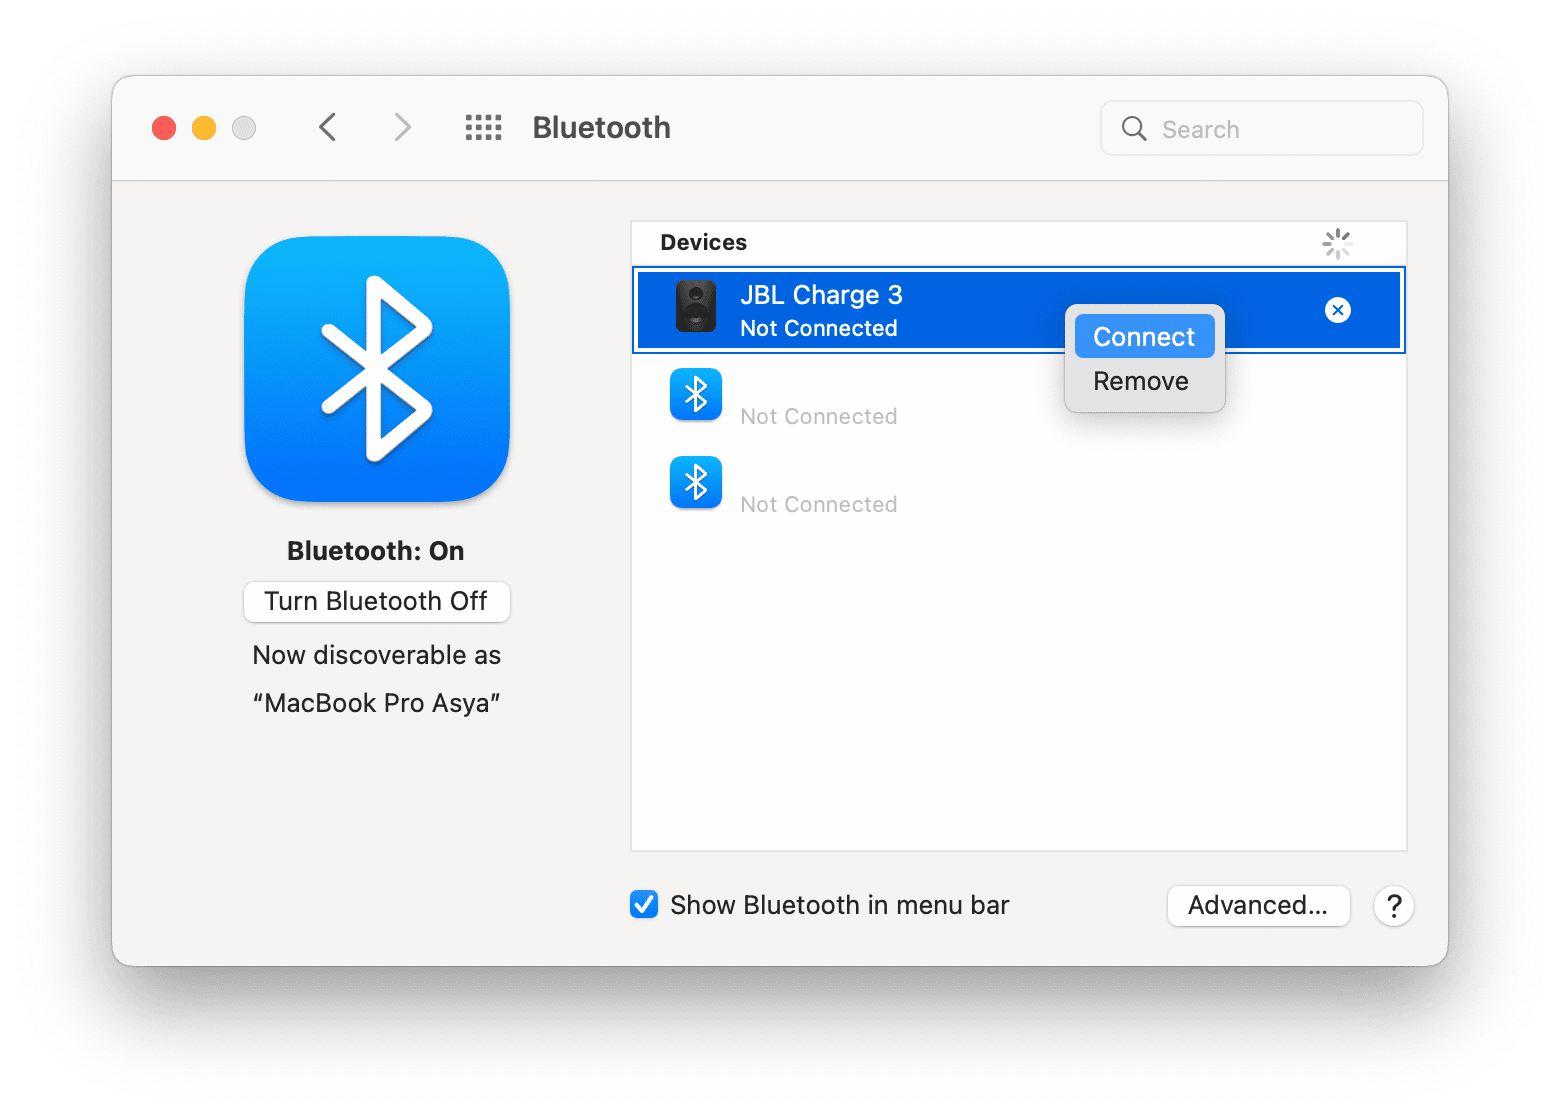 Bluetooth settings showing how to connect device